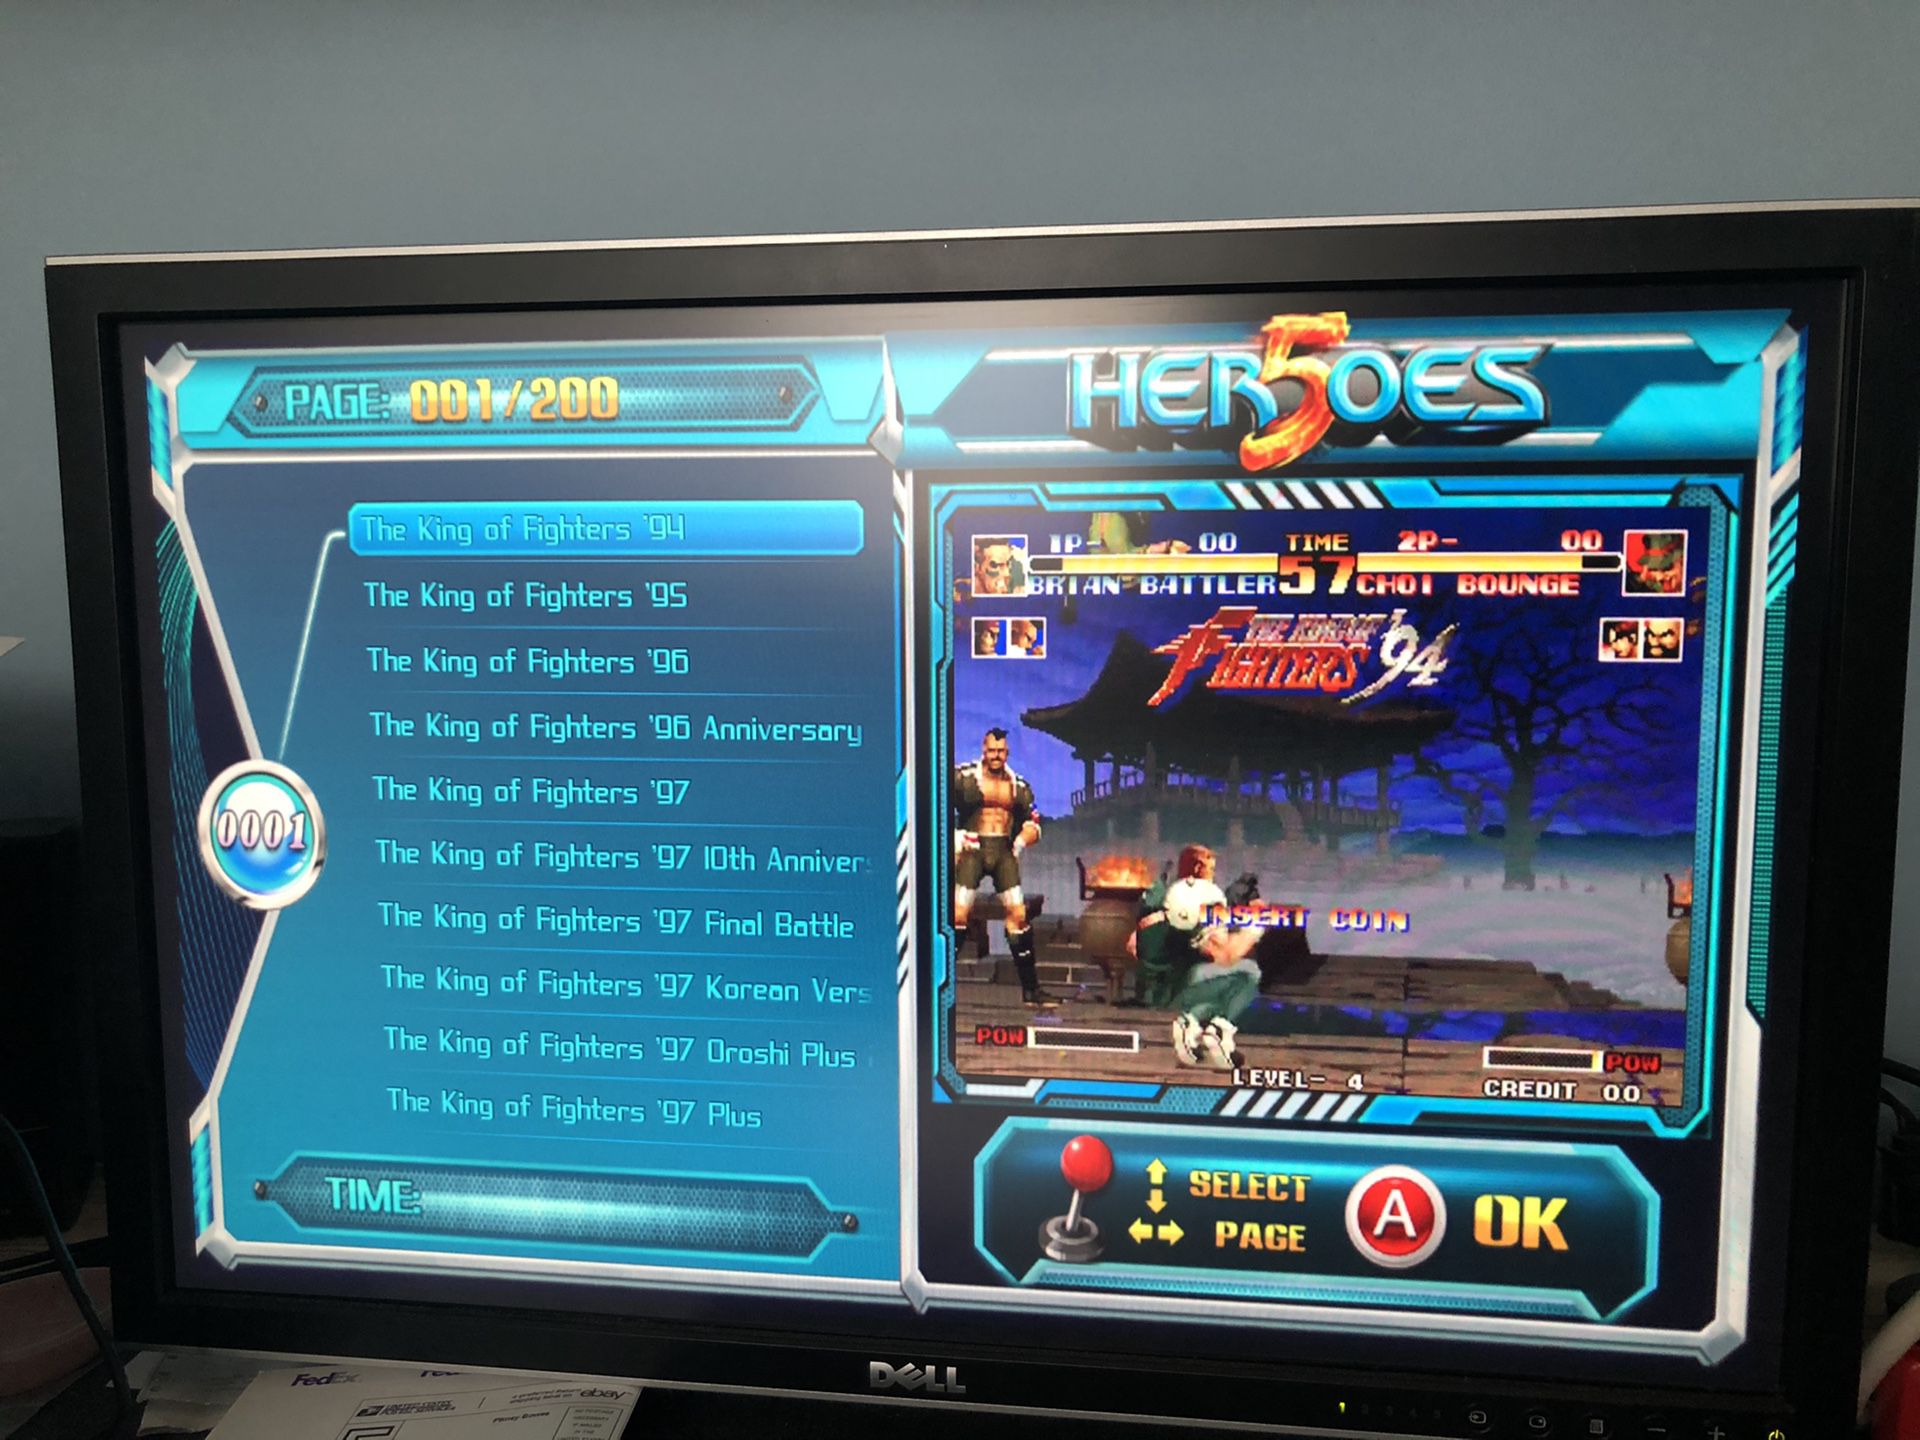 Pandora’s Box Heroes 5, 2000 games in 1 Home Arcade Console